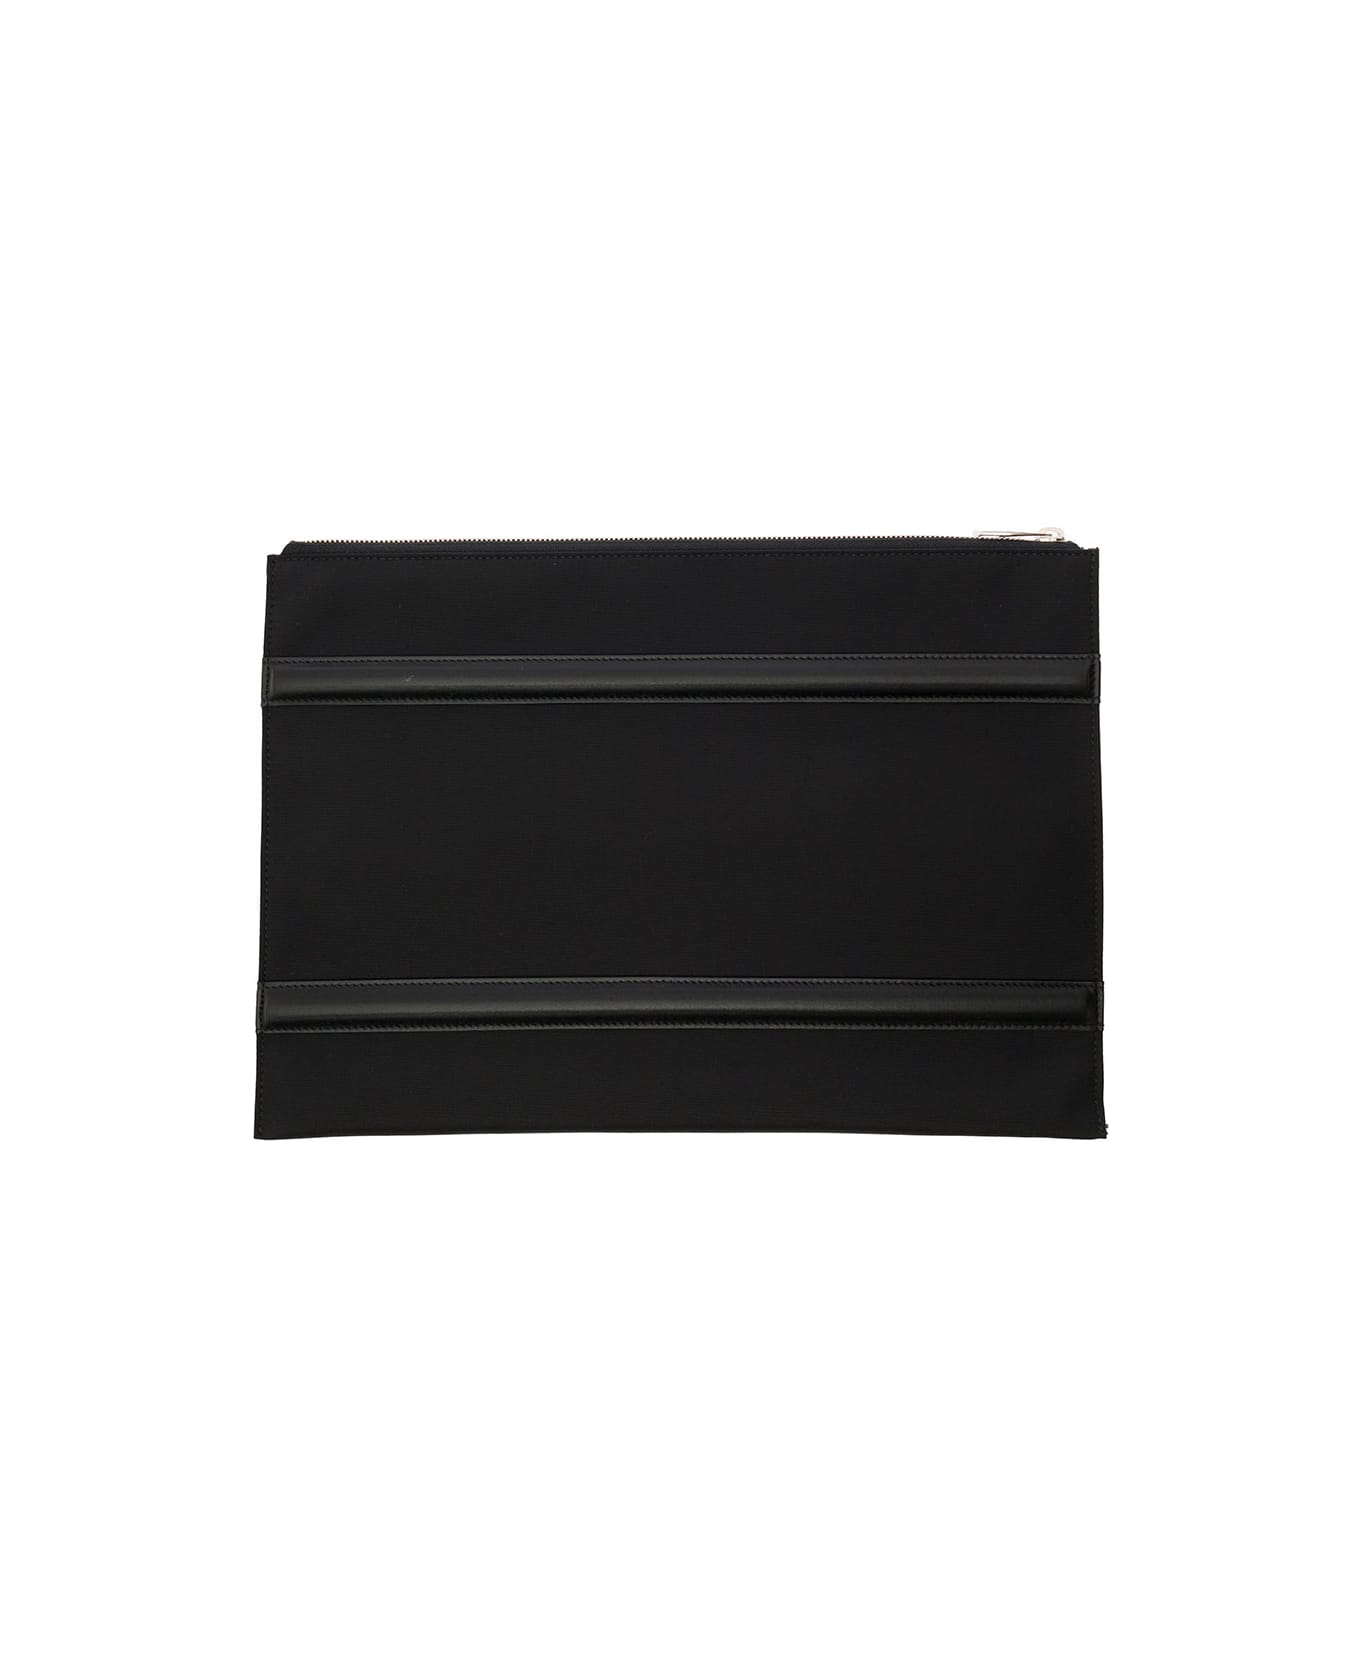 Alexander McQueen Black Pouch With Harness Detail In Nylon Man Alexander Mcqueen - Black バッグ